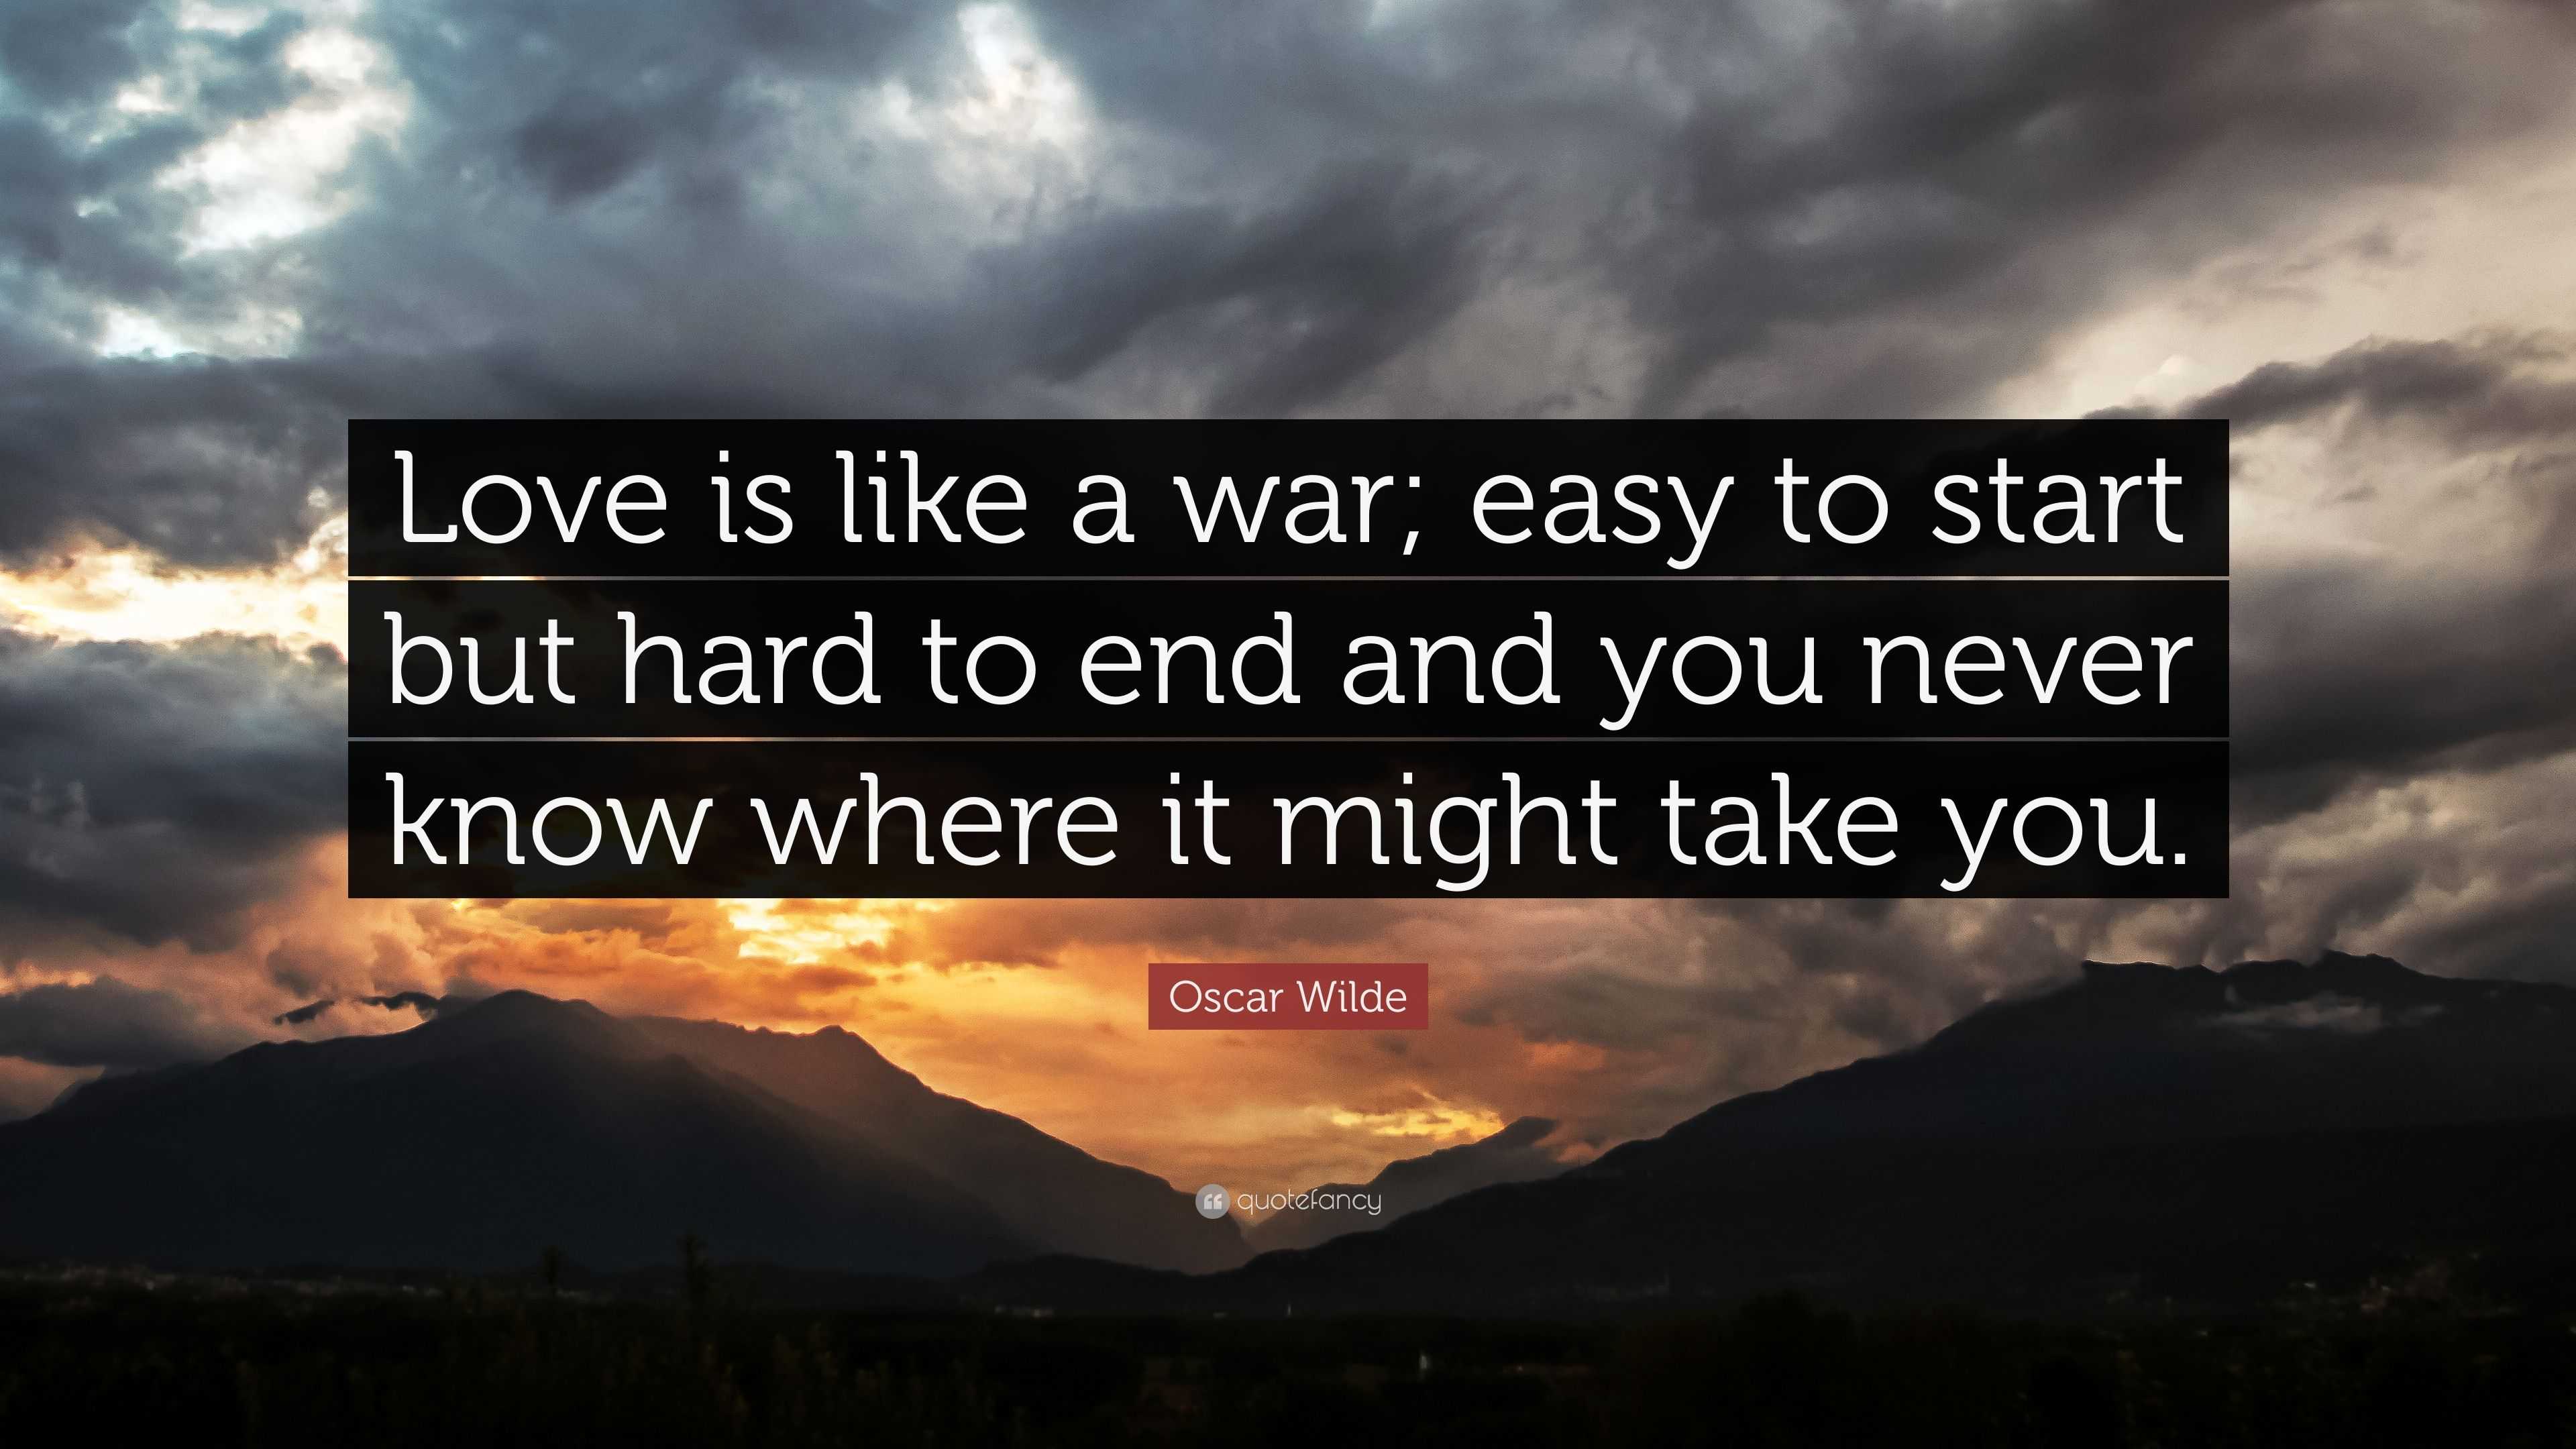 Oscar Wilde Quote “Love is like a war easy to start but hard